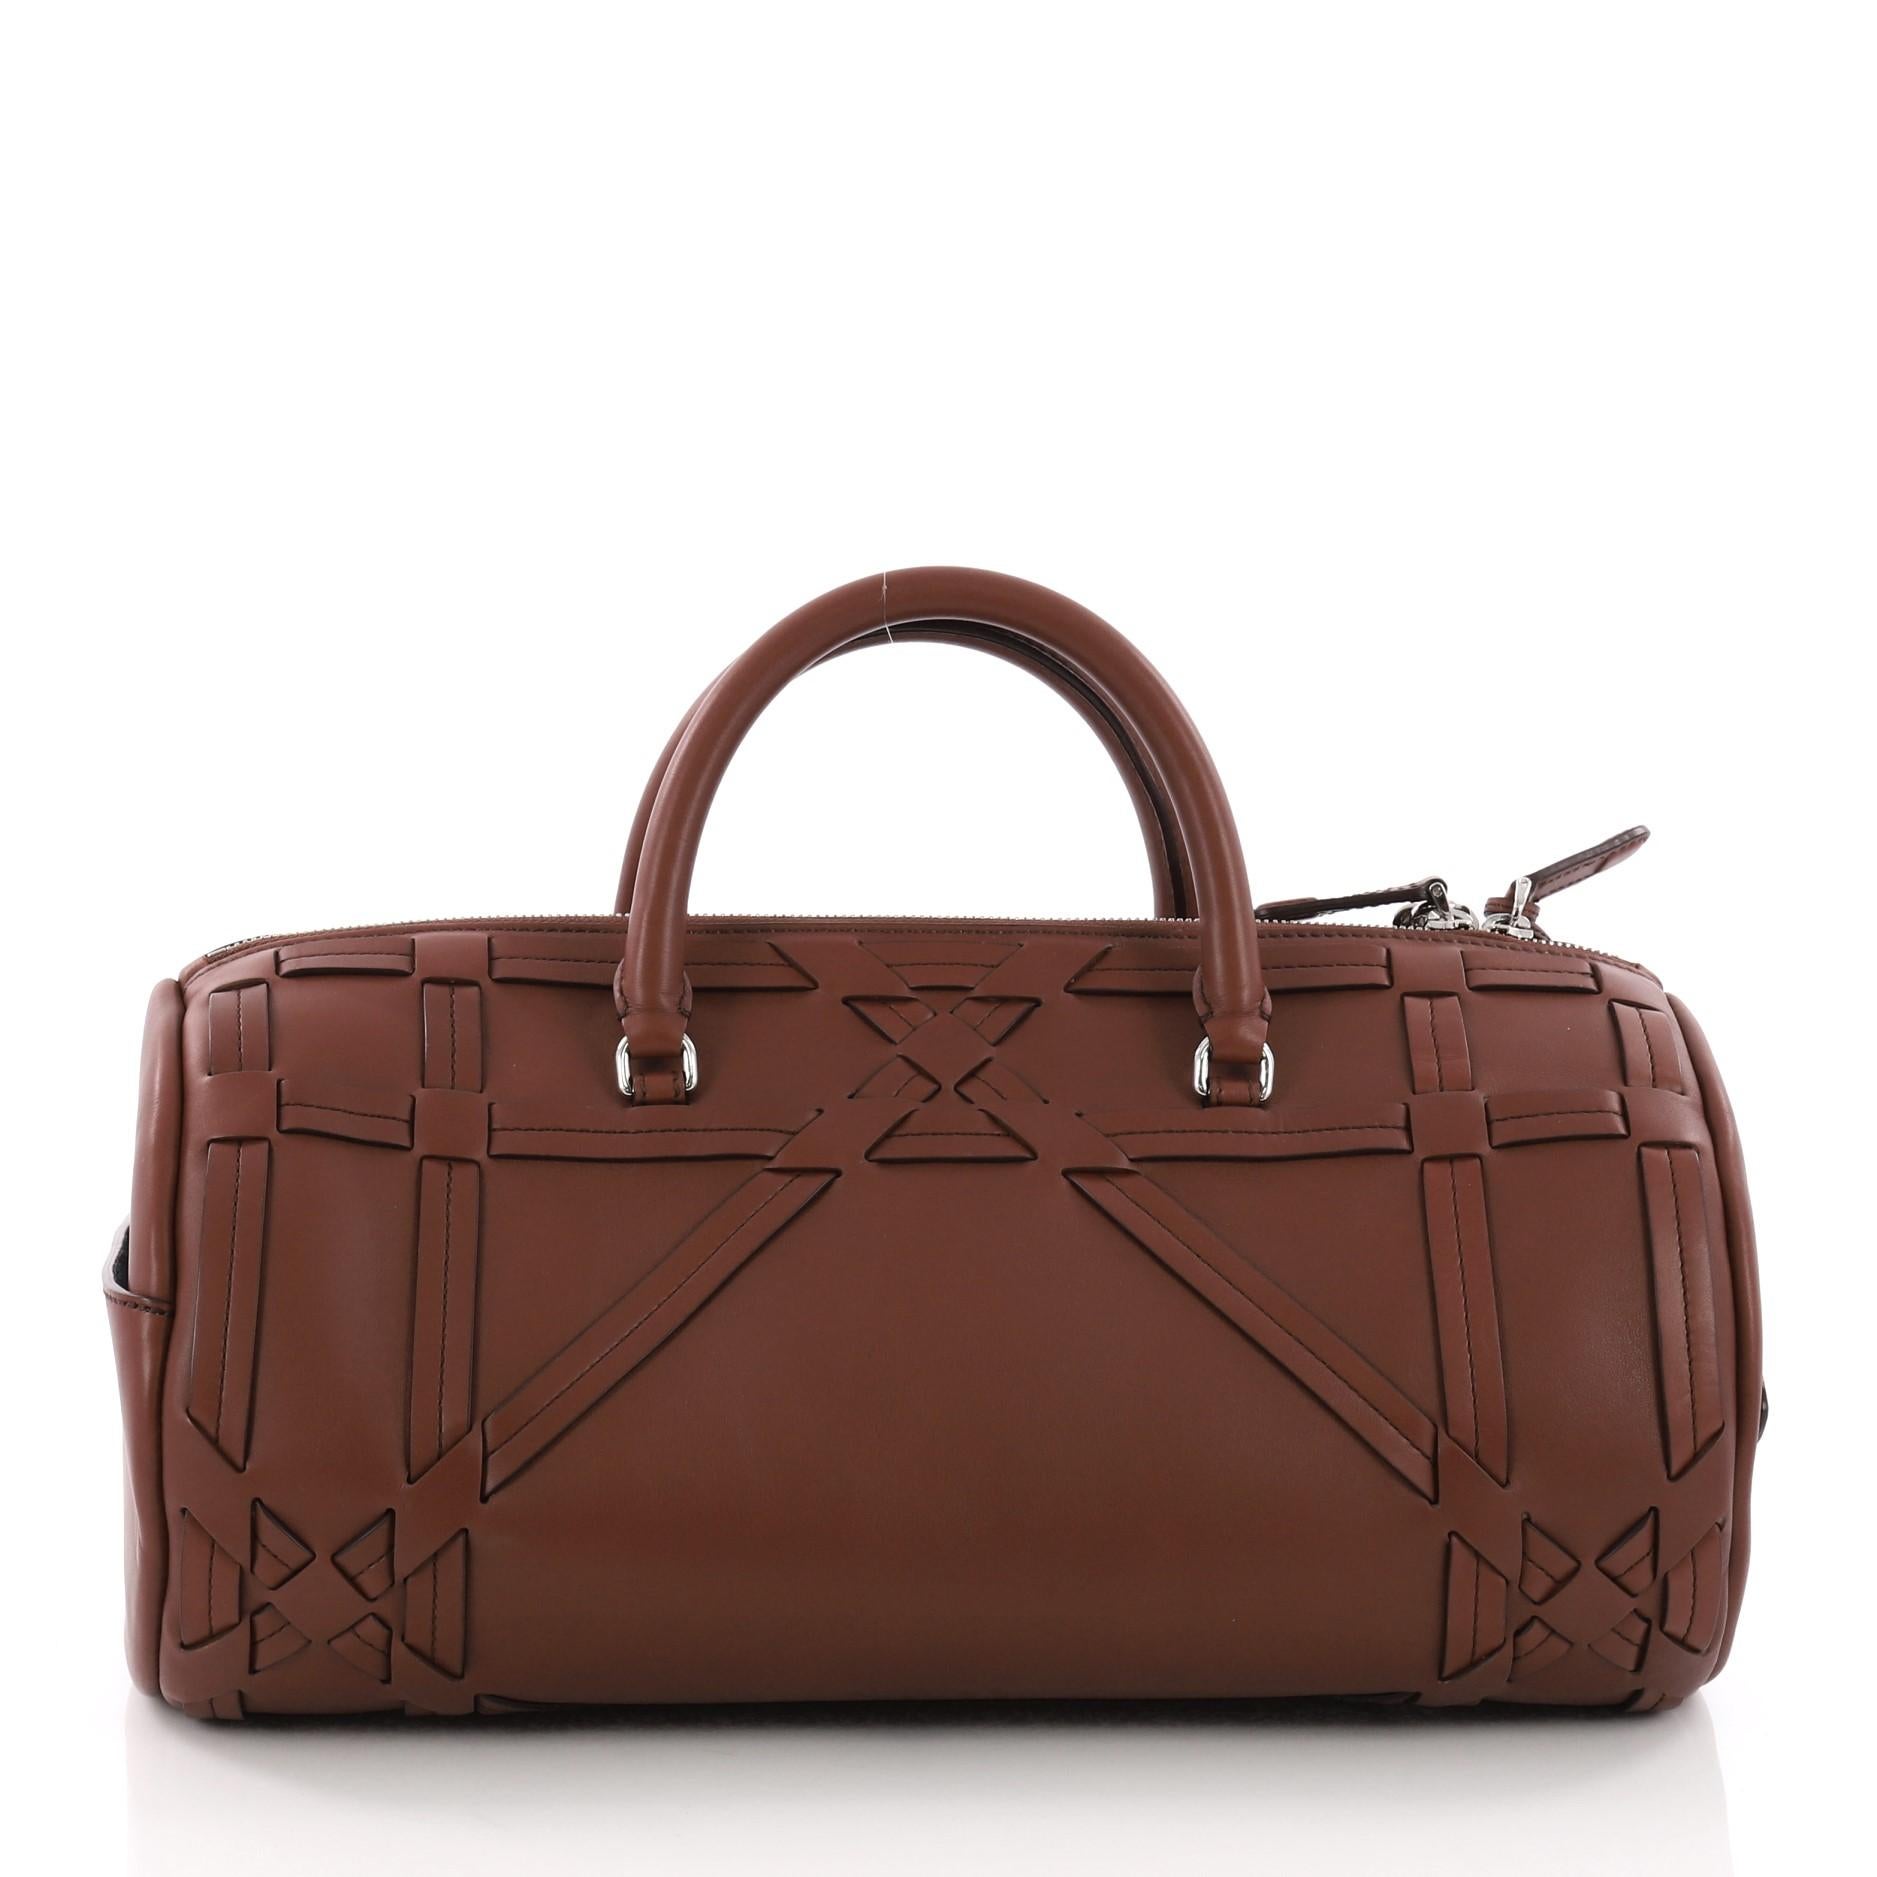 Brown Christian Dior Connect Duffle Bag Giant Cannage Woven Leather